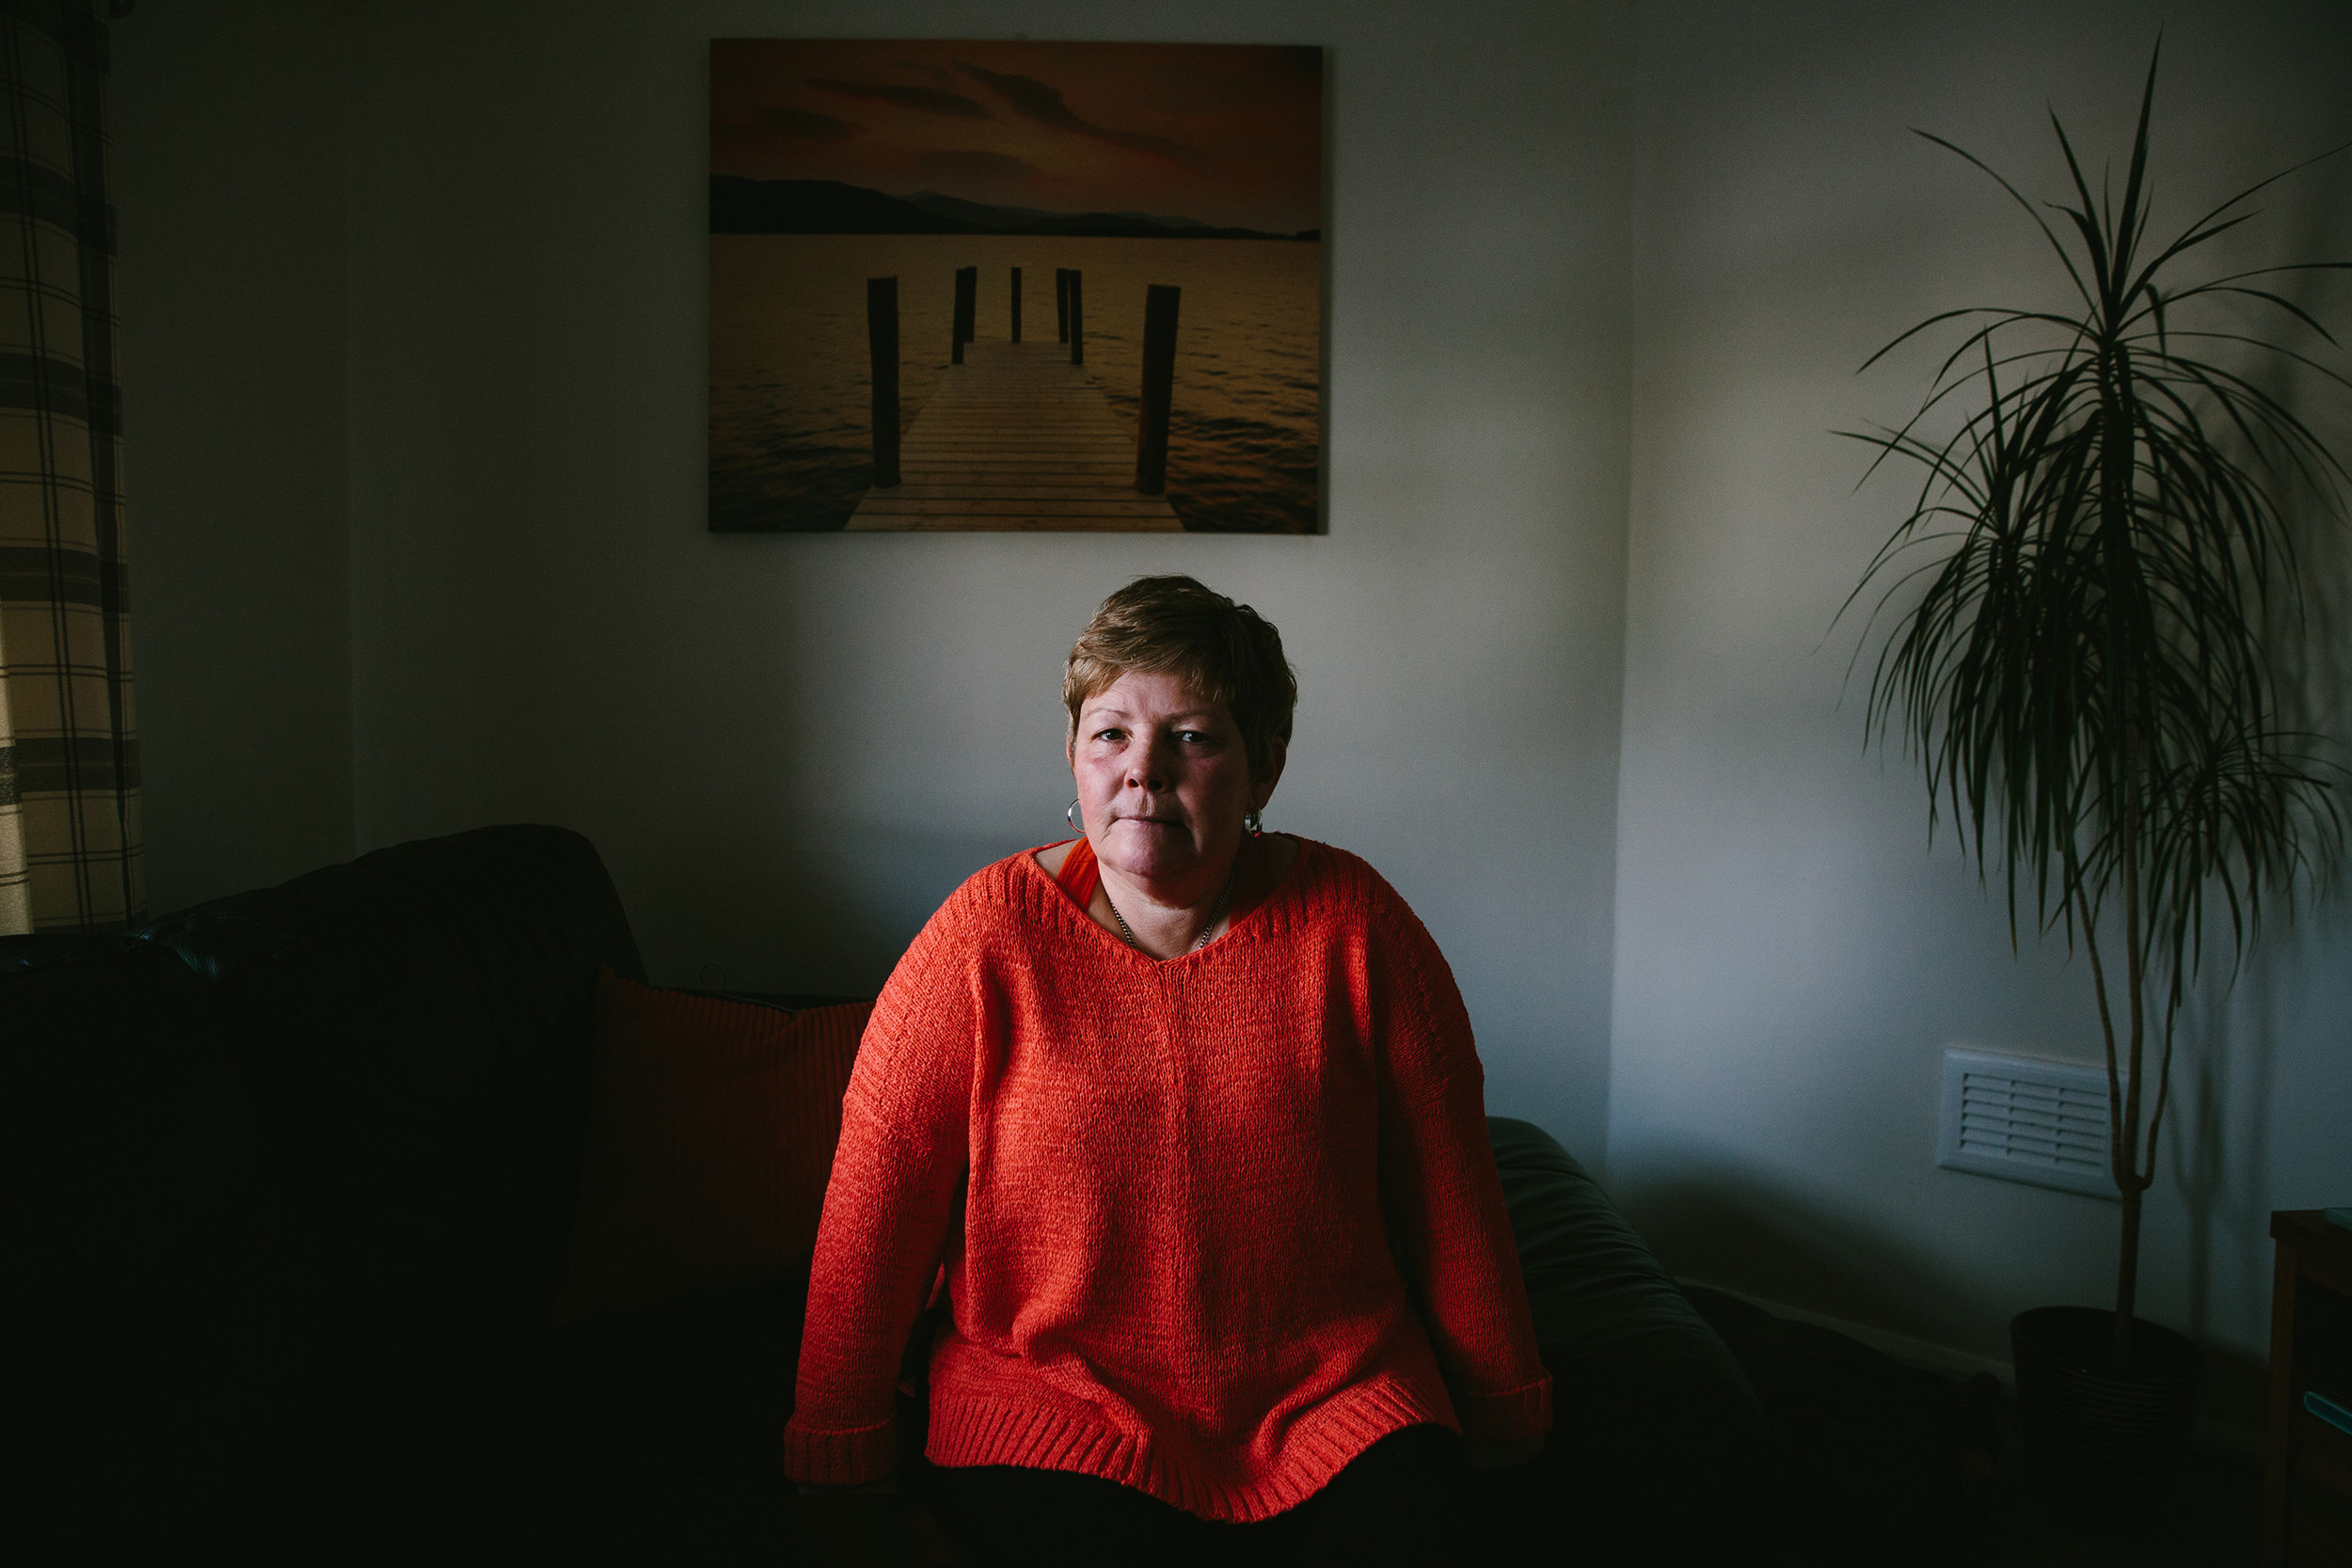  Gill Hedley, from Newcastle, had mesh fitted in a procedure called a rectopexy following a bowel prolapse. She says the side-effects she suffered as a result have left her unable to work. She was forced to give up her house       